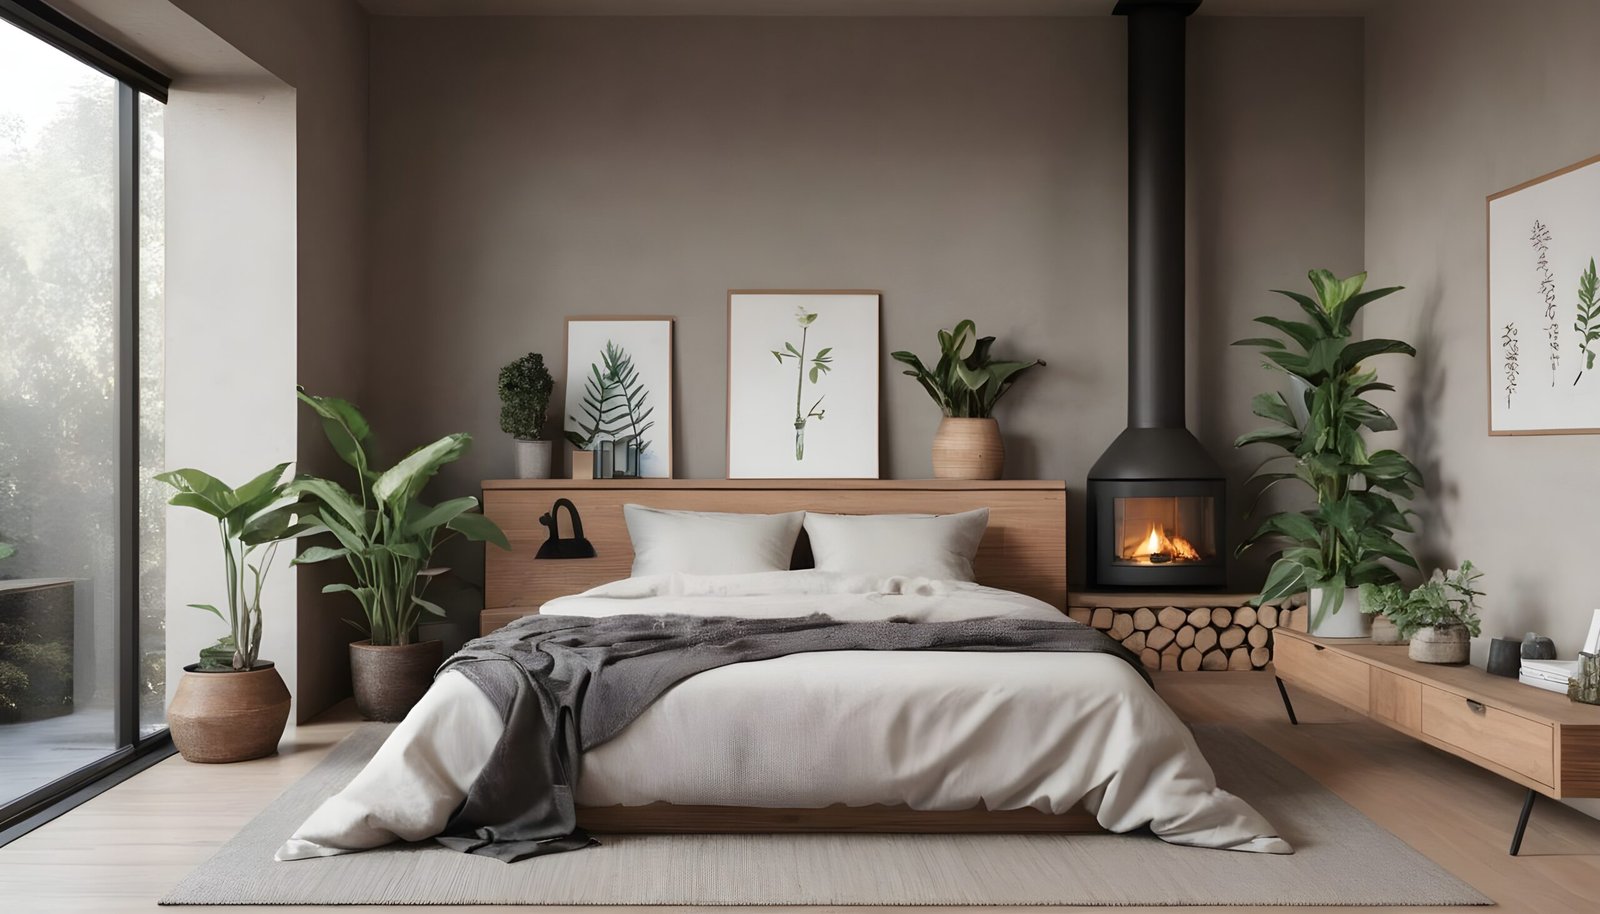 Japandi bedroom with wooden details, a fireplace and lots of plants.